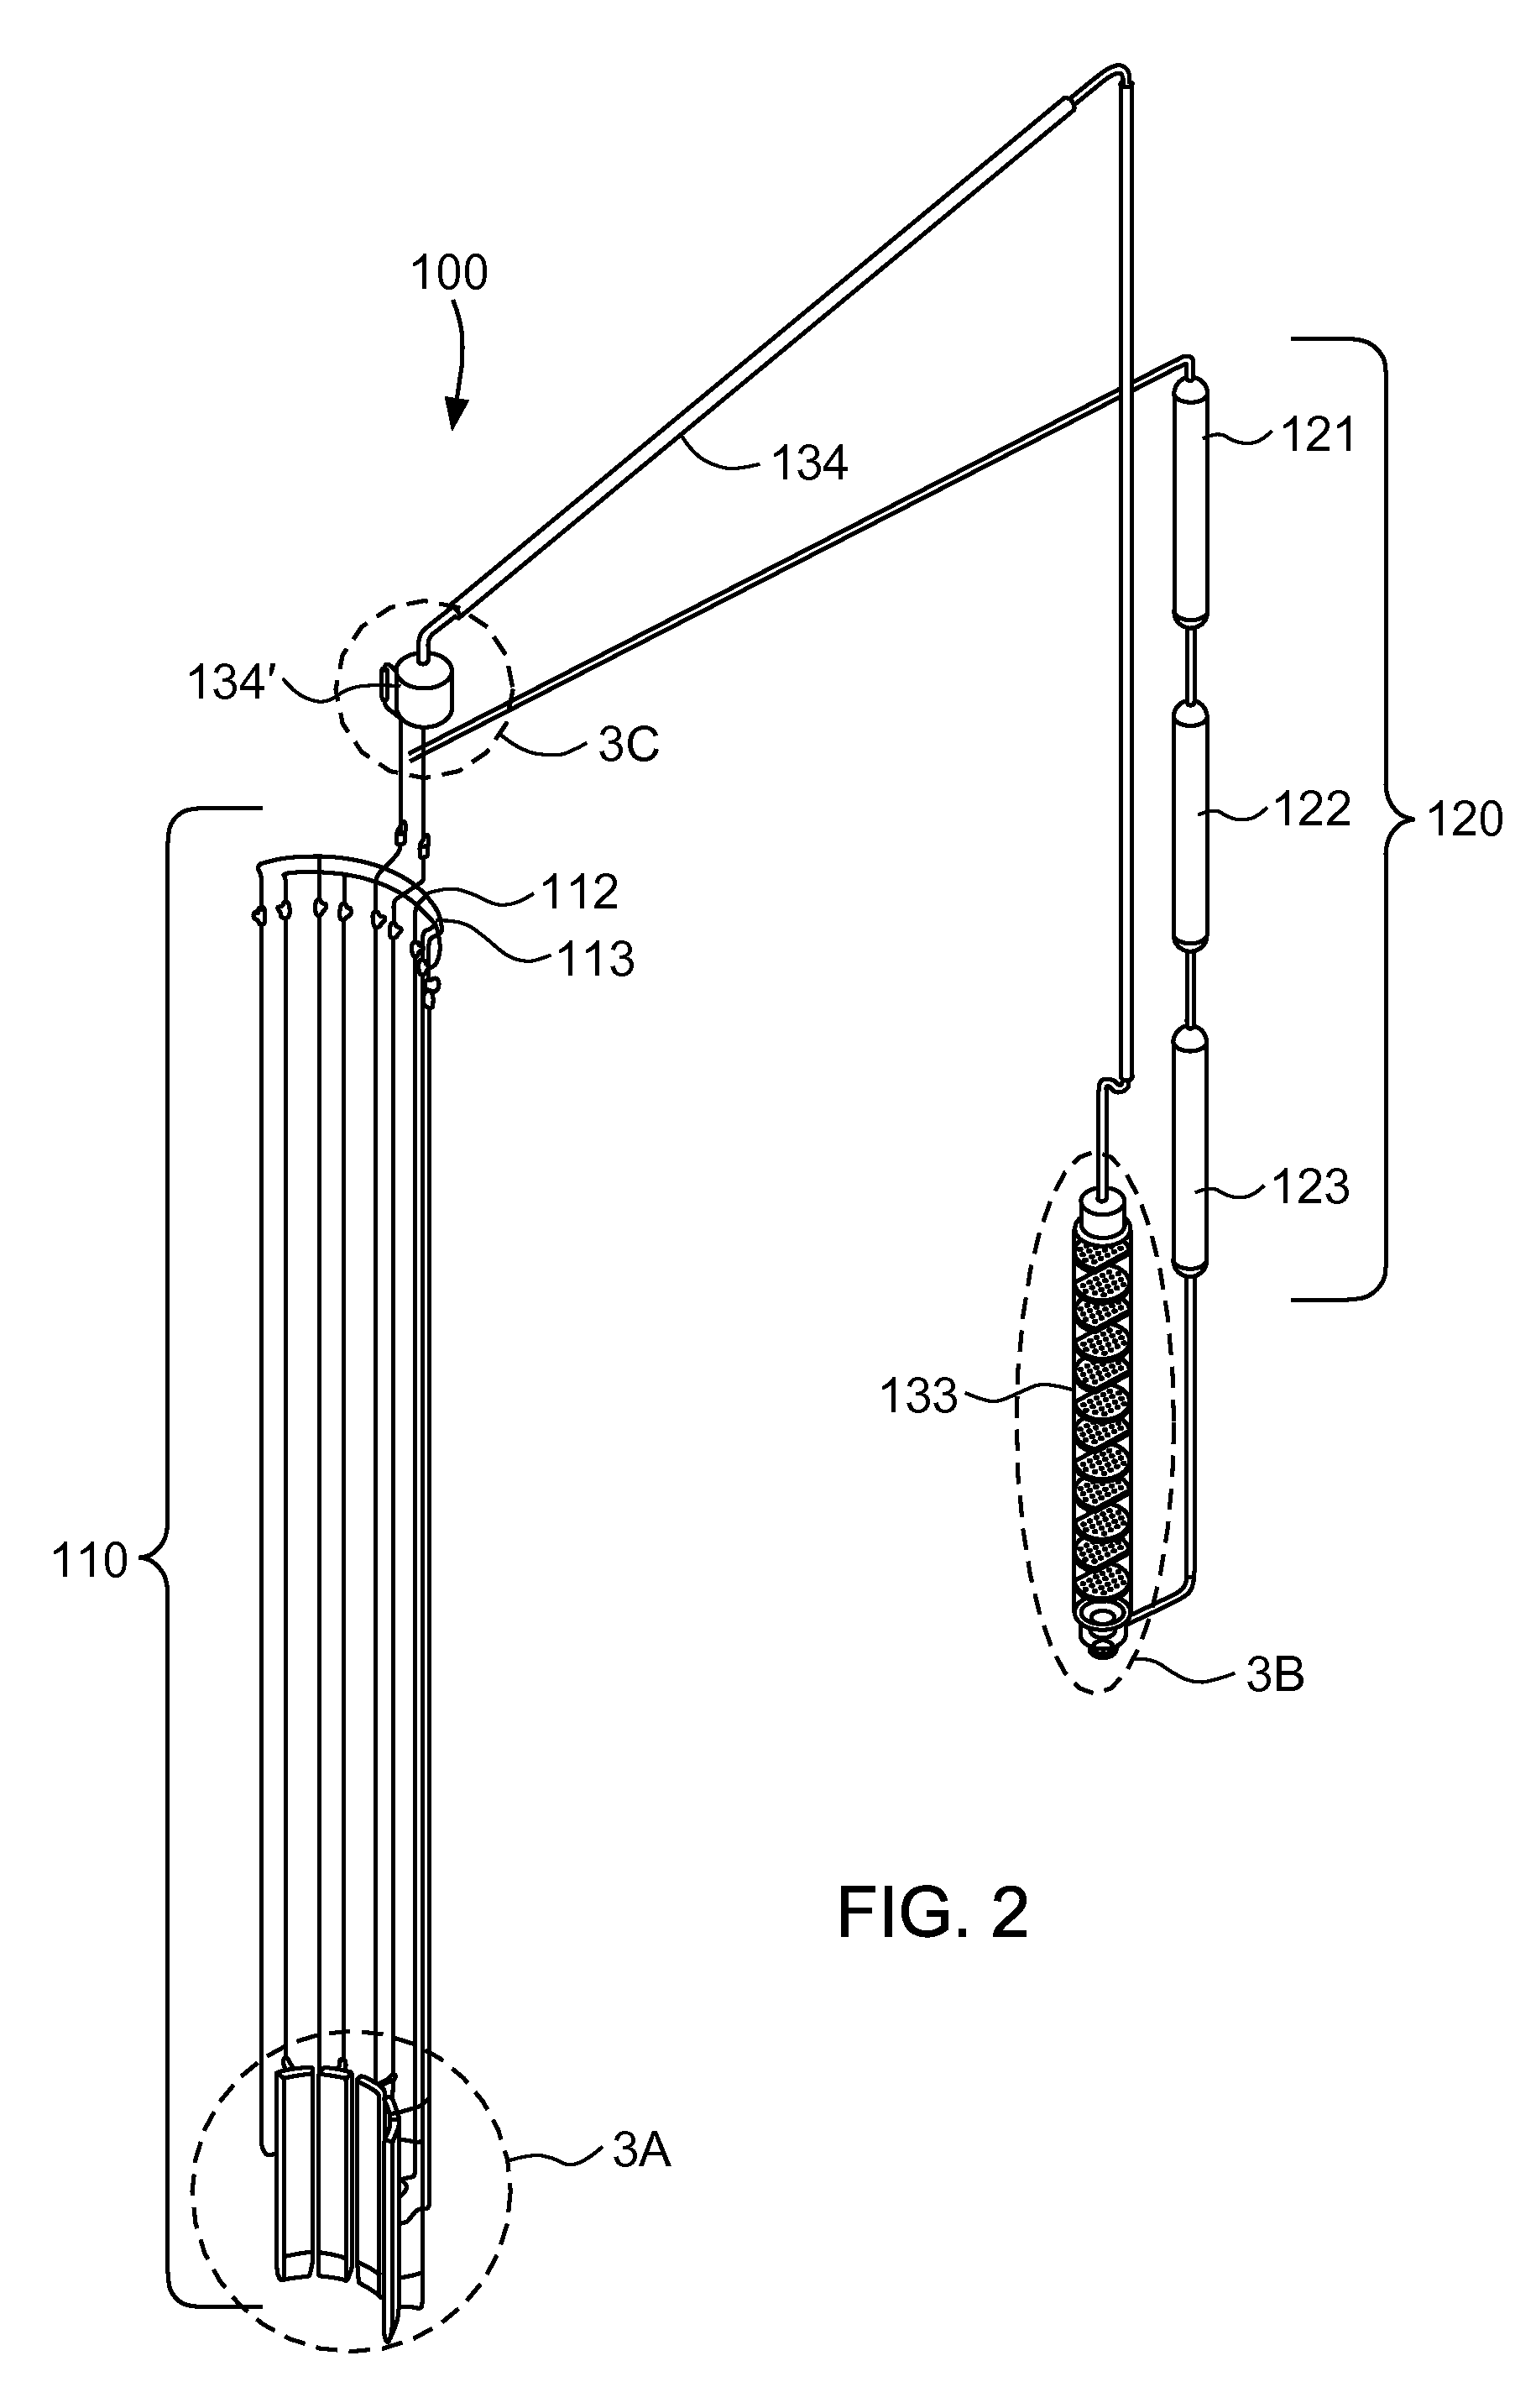 Systems and methods for efficiently preparing plutonium-238 with high isotopic purity